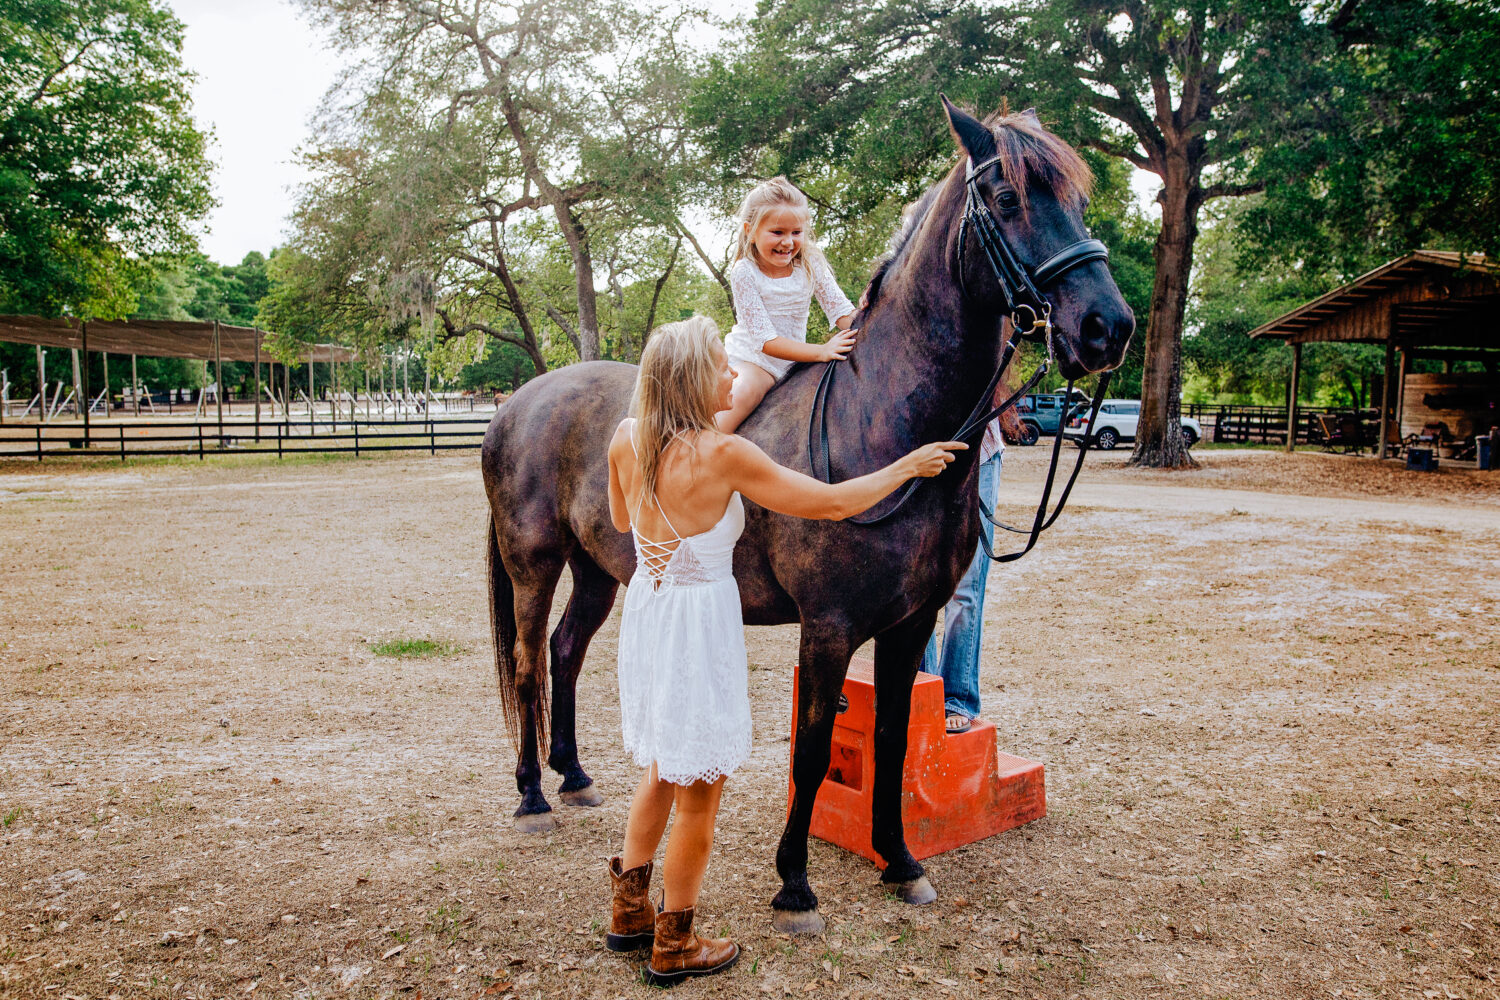 Mom and dad helping little girl get comfortable on a horse with no saddle